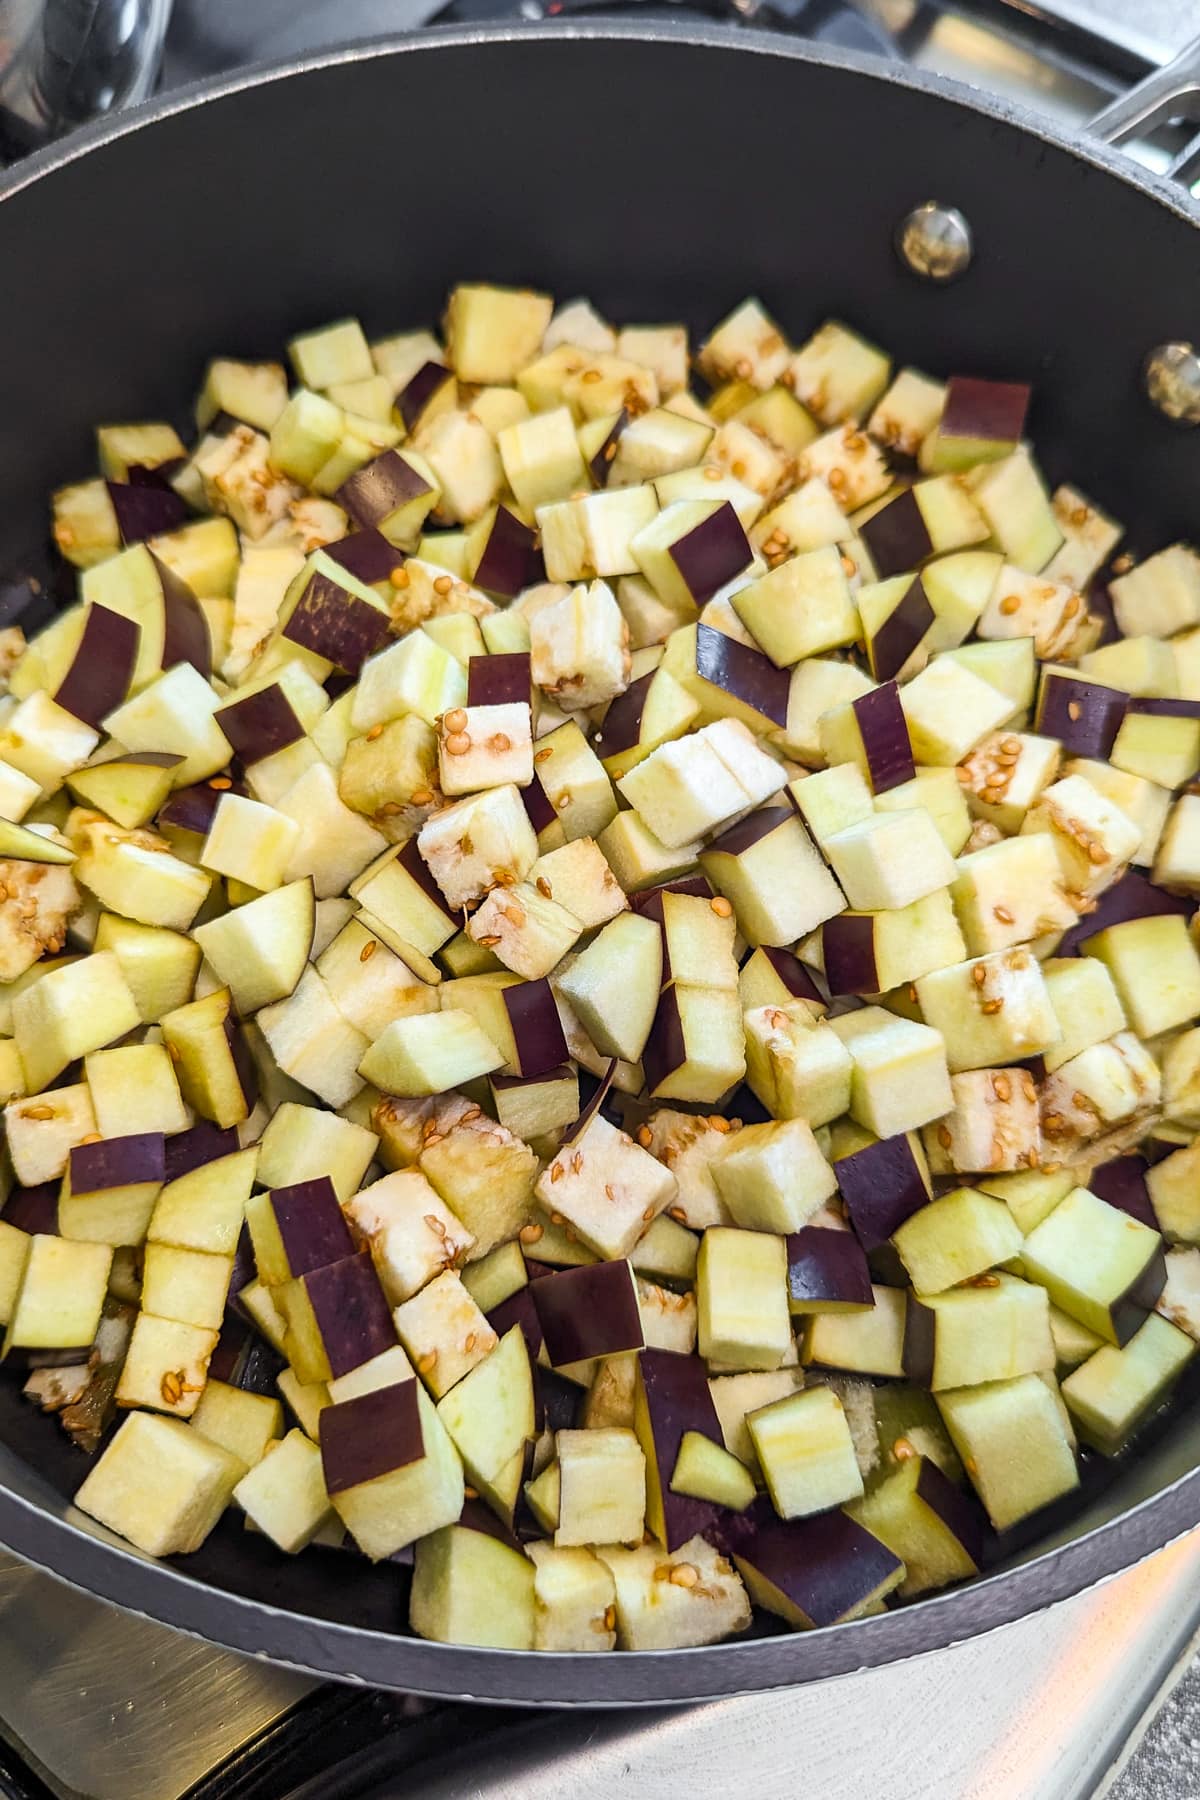 Close look of diced eggplant in a frying pan on the stove.